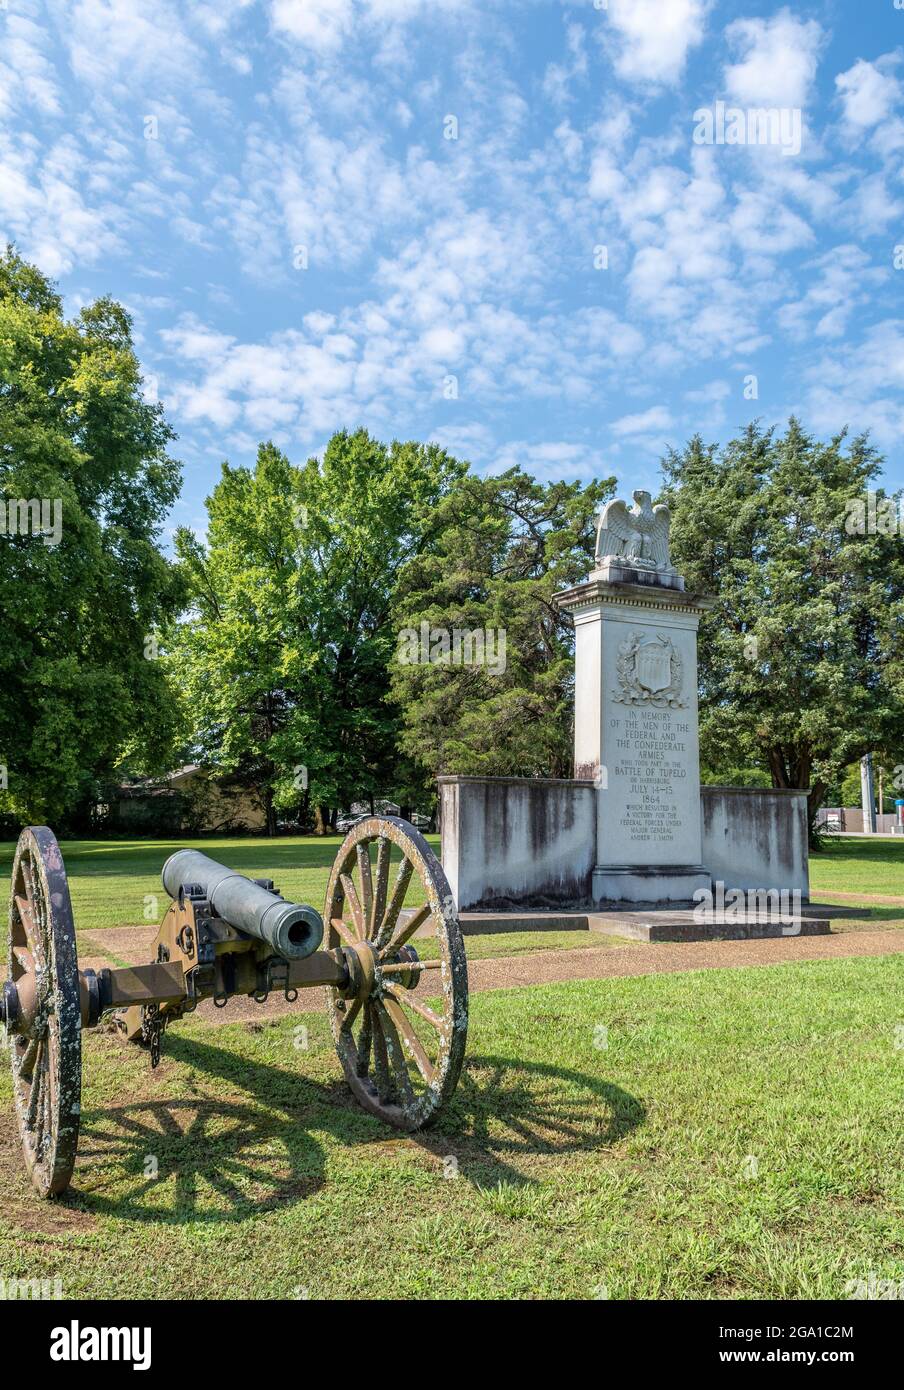 Tupelo National Battlefield location of the Battle of Harrisburg in 1864 during the American Civil War, Tupelo, Mississippi, USA. Stock Photo